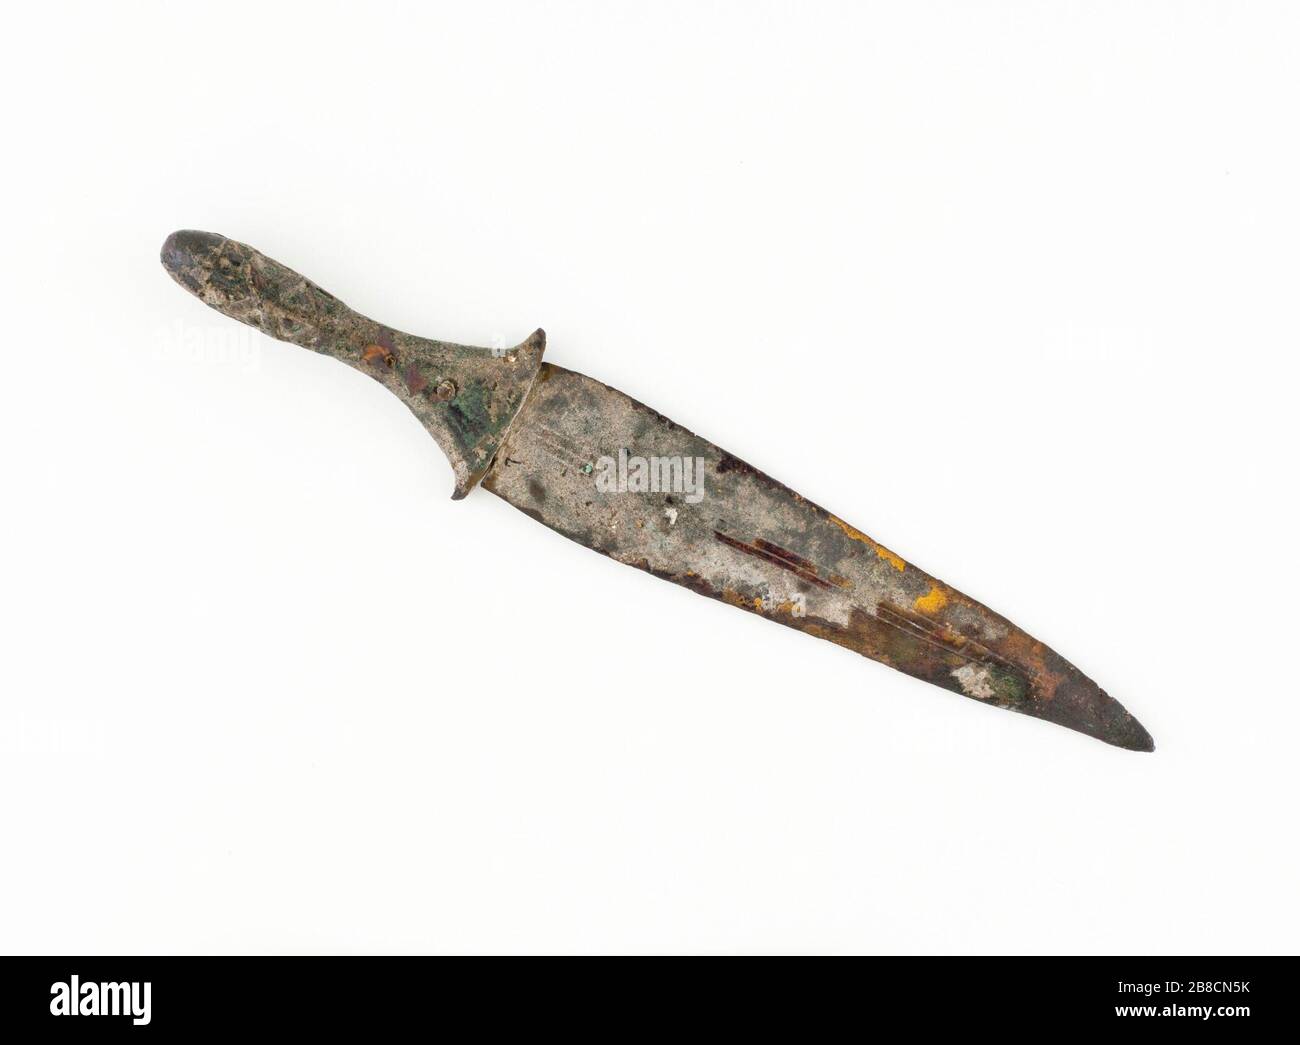 'Dagger; Iran, Luristan, circa 2600-2350 B.C. Arms and Armor; daggers Bronze, cast Overall length:  9 1/2 in. (24.2 cm); Hilt length:  3 1/2 in. (8.5 cm); Blade length:  6 in. (15.7 cm) The Nasli M. Heeramaneck Collection of Ancient Near Eastern and Central Asian Art, gift of The Ahmanson Foundation (M.76.97.501) Art of the Ancient Near East; between circa 2600 and circa 2350 date QS:P571,+2500-00-00T00:00:00Z/6,P1319,+2600-00-00T00:00:00Z/9,P1326,+2350-00-00T00:00:00Z/9,P1480,Q5727902 B.C.; ' Stock Photo